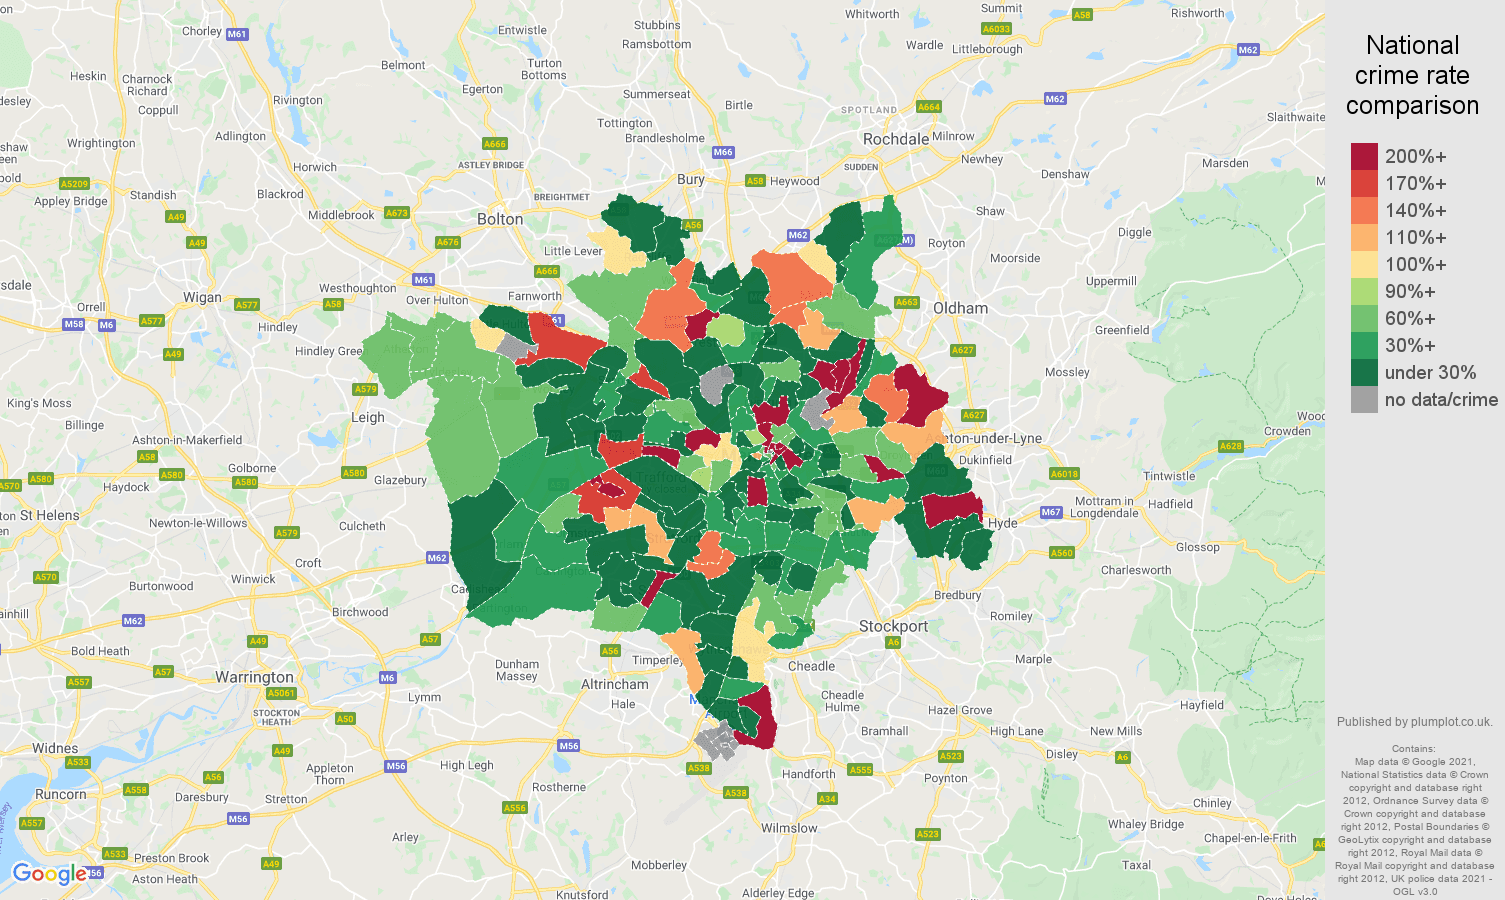 Manchester shoplifting crime rate comparison map